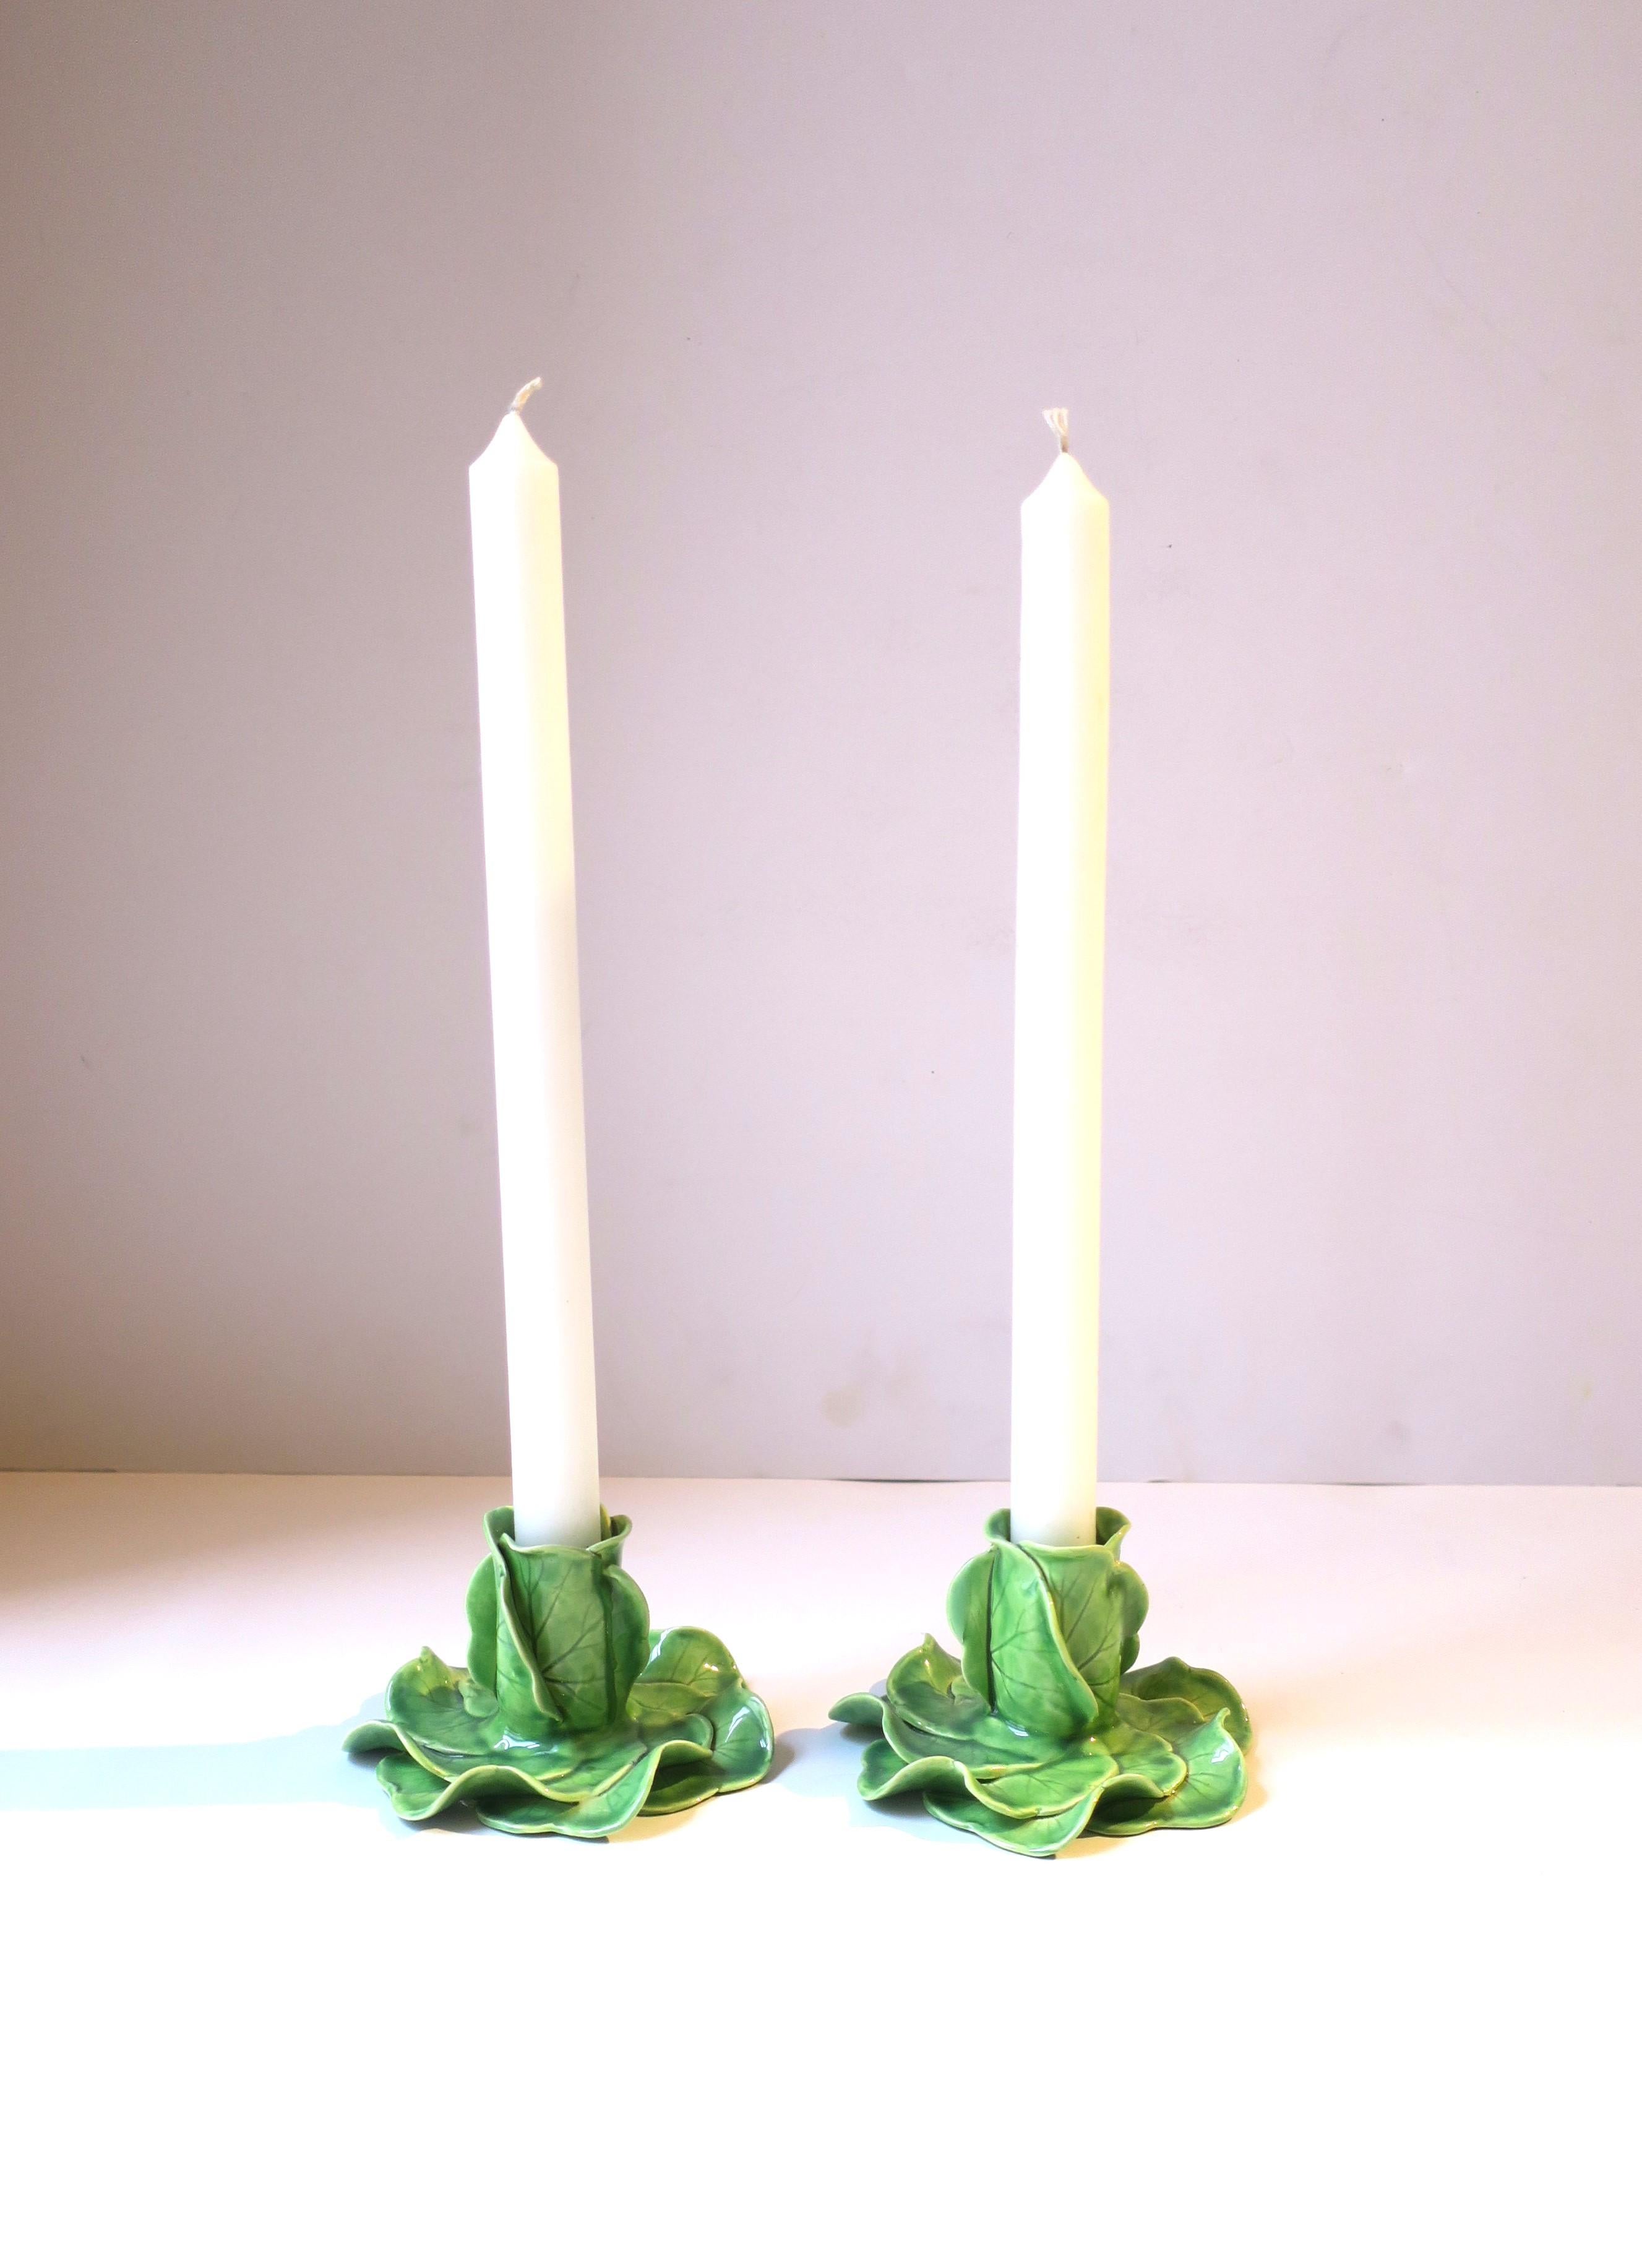 A beautiful set of green porcelain lettuce leaf candlestick holders styled after American designer, Dodie Thayer, circa late-20th century, Australia. Marked on bottom as shown in last image, including designers' initials. A beautiful set to use